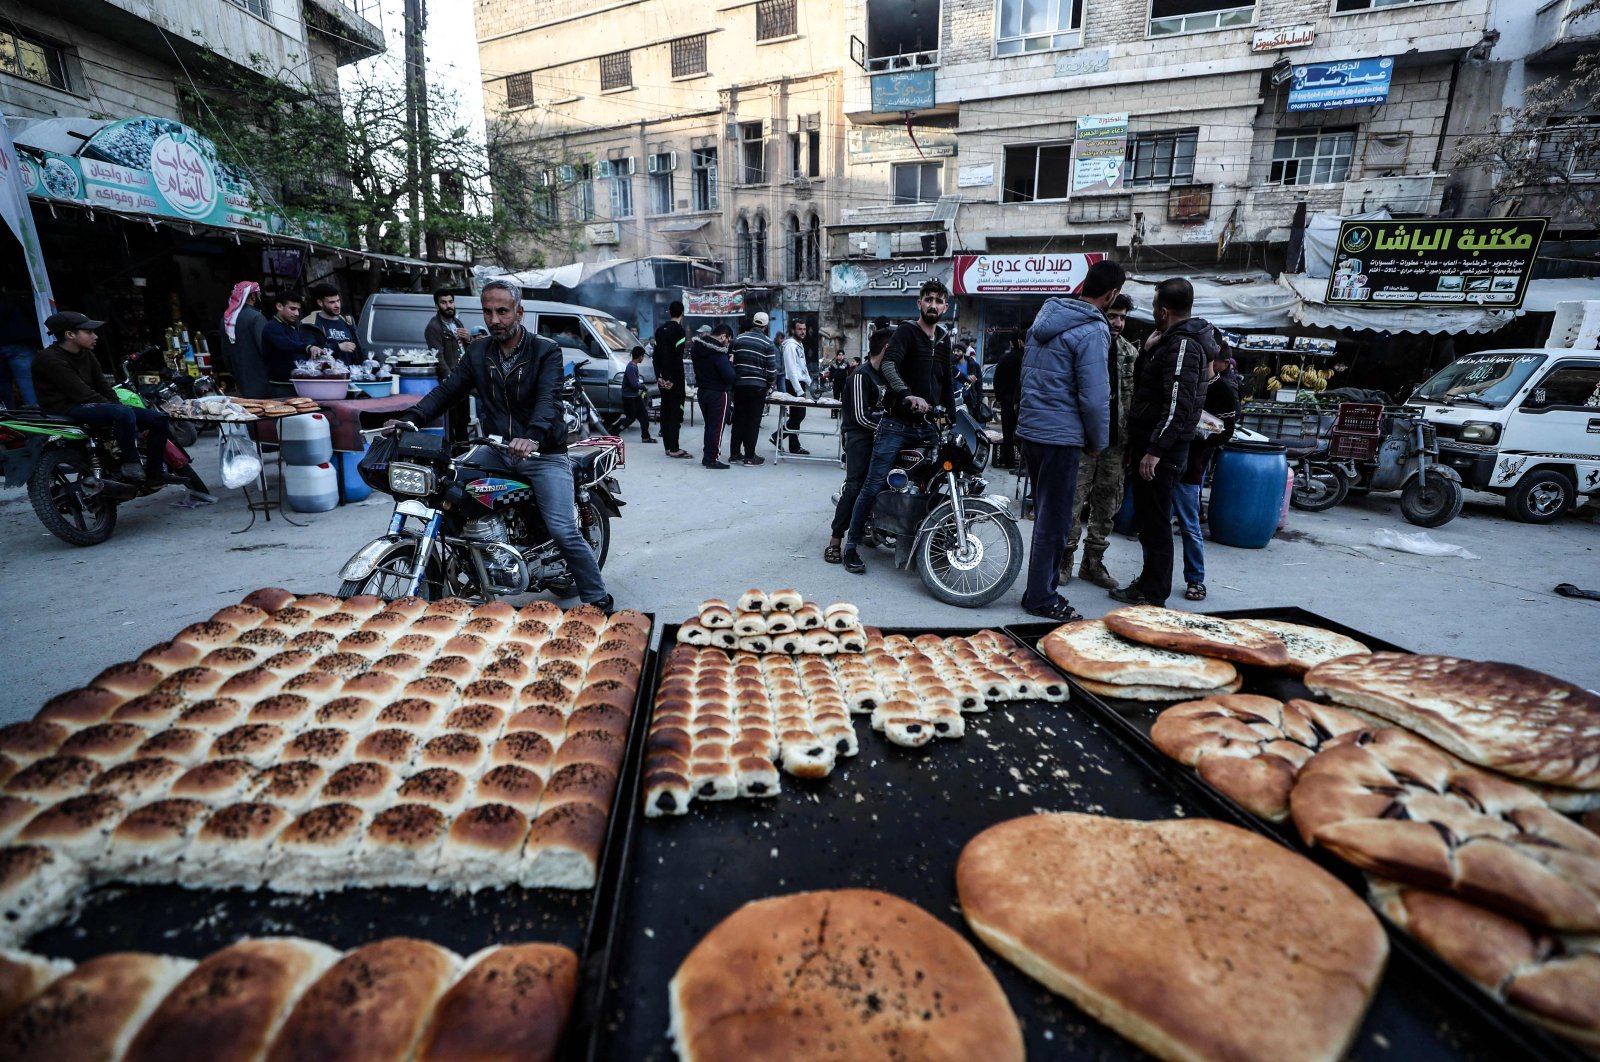 A street vendor displays pastries and bread, as Syrians buy food products at a market ahead of iftar, the evening meal that ends the daily fast at sunset, on the second day of the Islamic holy month of Ramadan, near the strategic M4 highway in the city of Ariha, in the southern countryside of Idlib province, Syria, April 15, 2021. (AFP Photo)